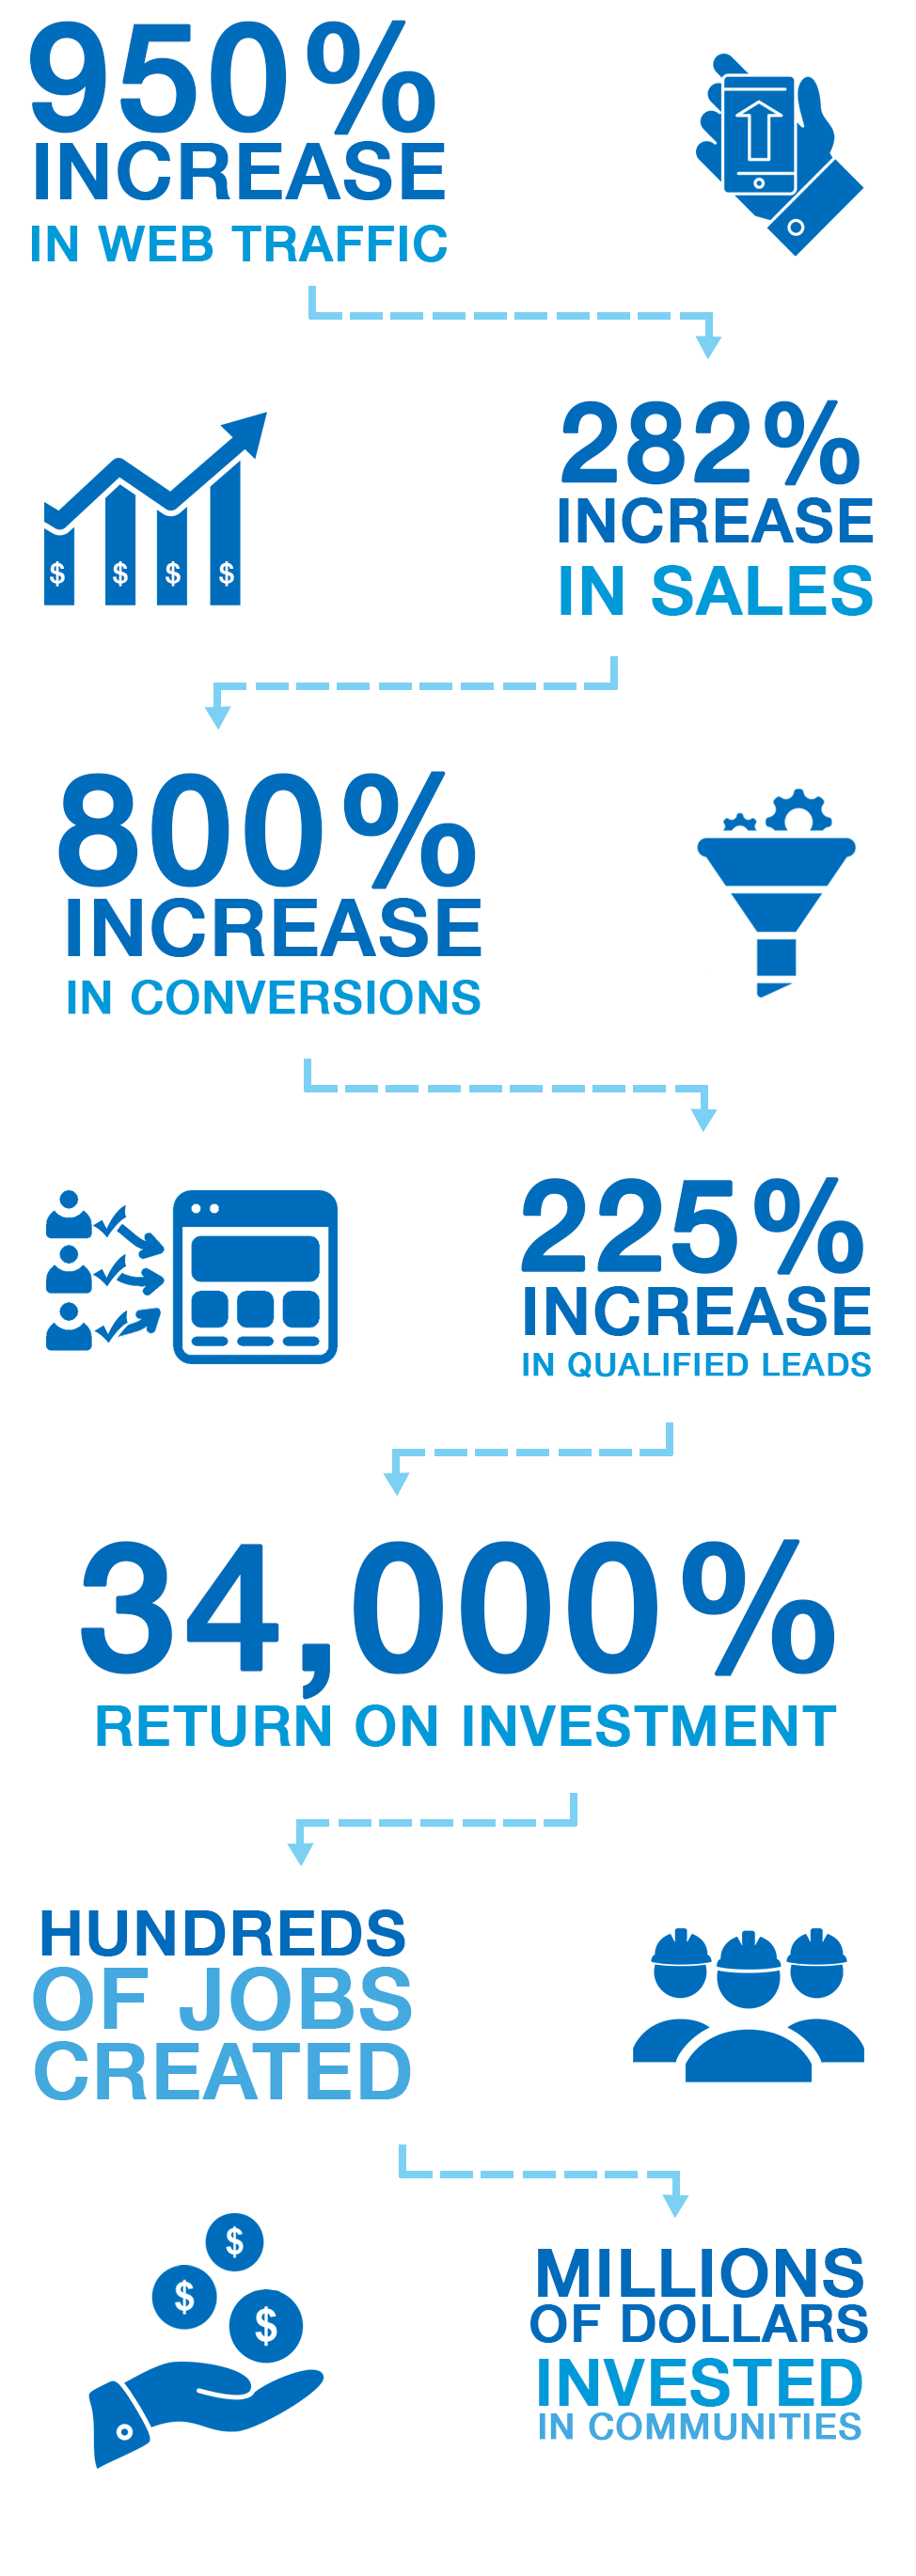 Info Graphic: 950% increase in web traffic, 282% increase in sales, 800% increase in conversions, 225% increase in qualified leads, 34000% return on investment, hundreds of jobs created, millions of dollars invested in communities